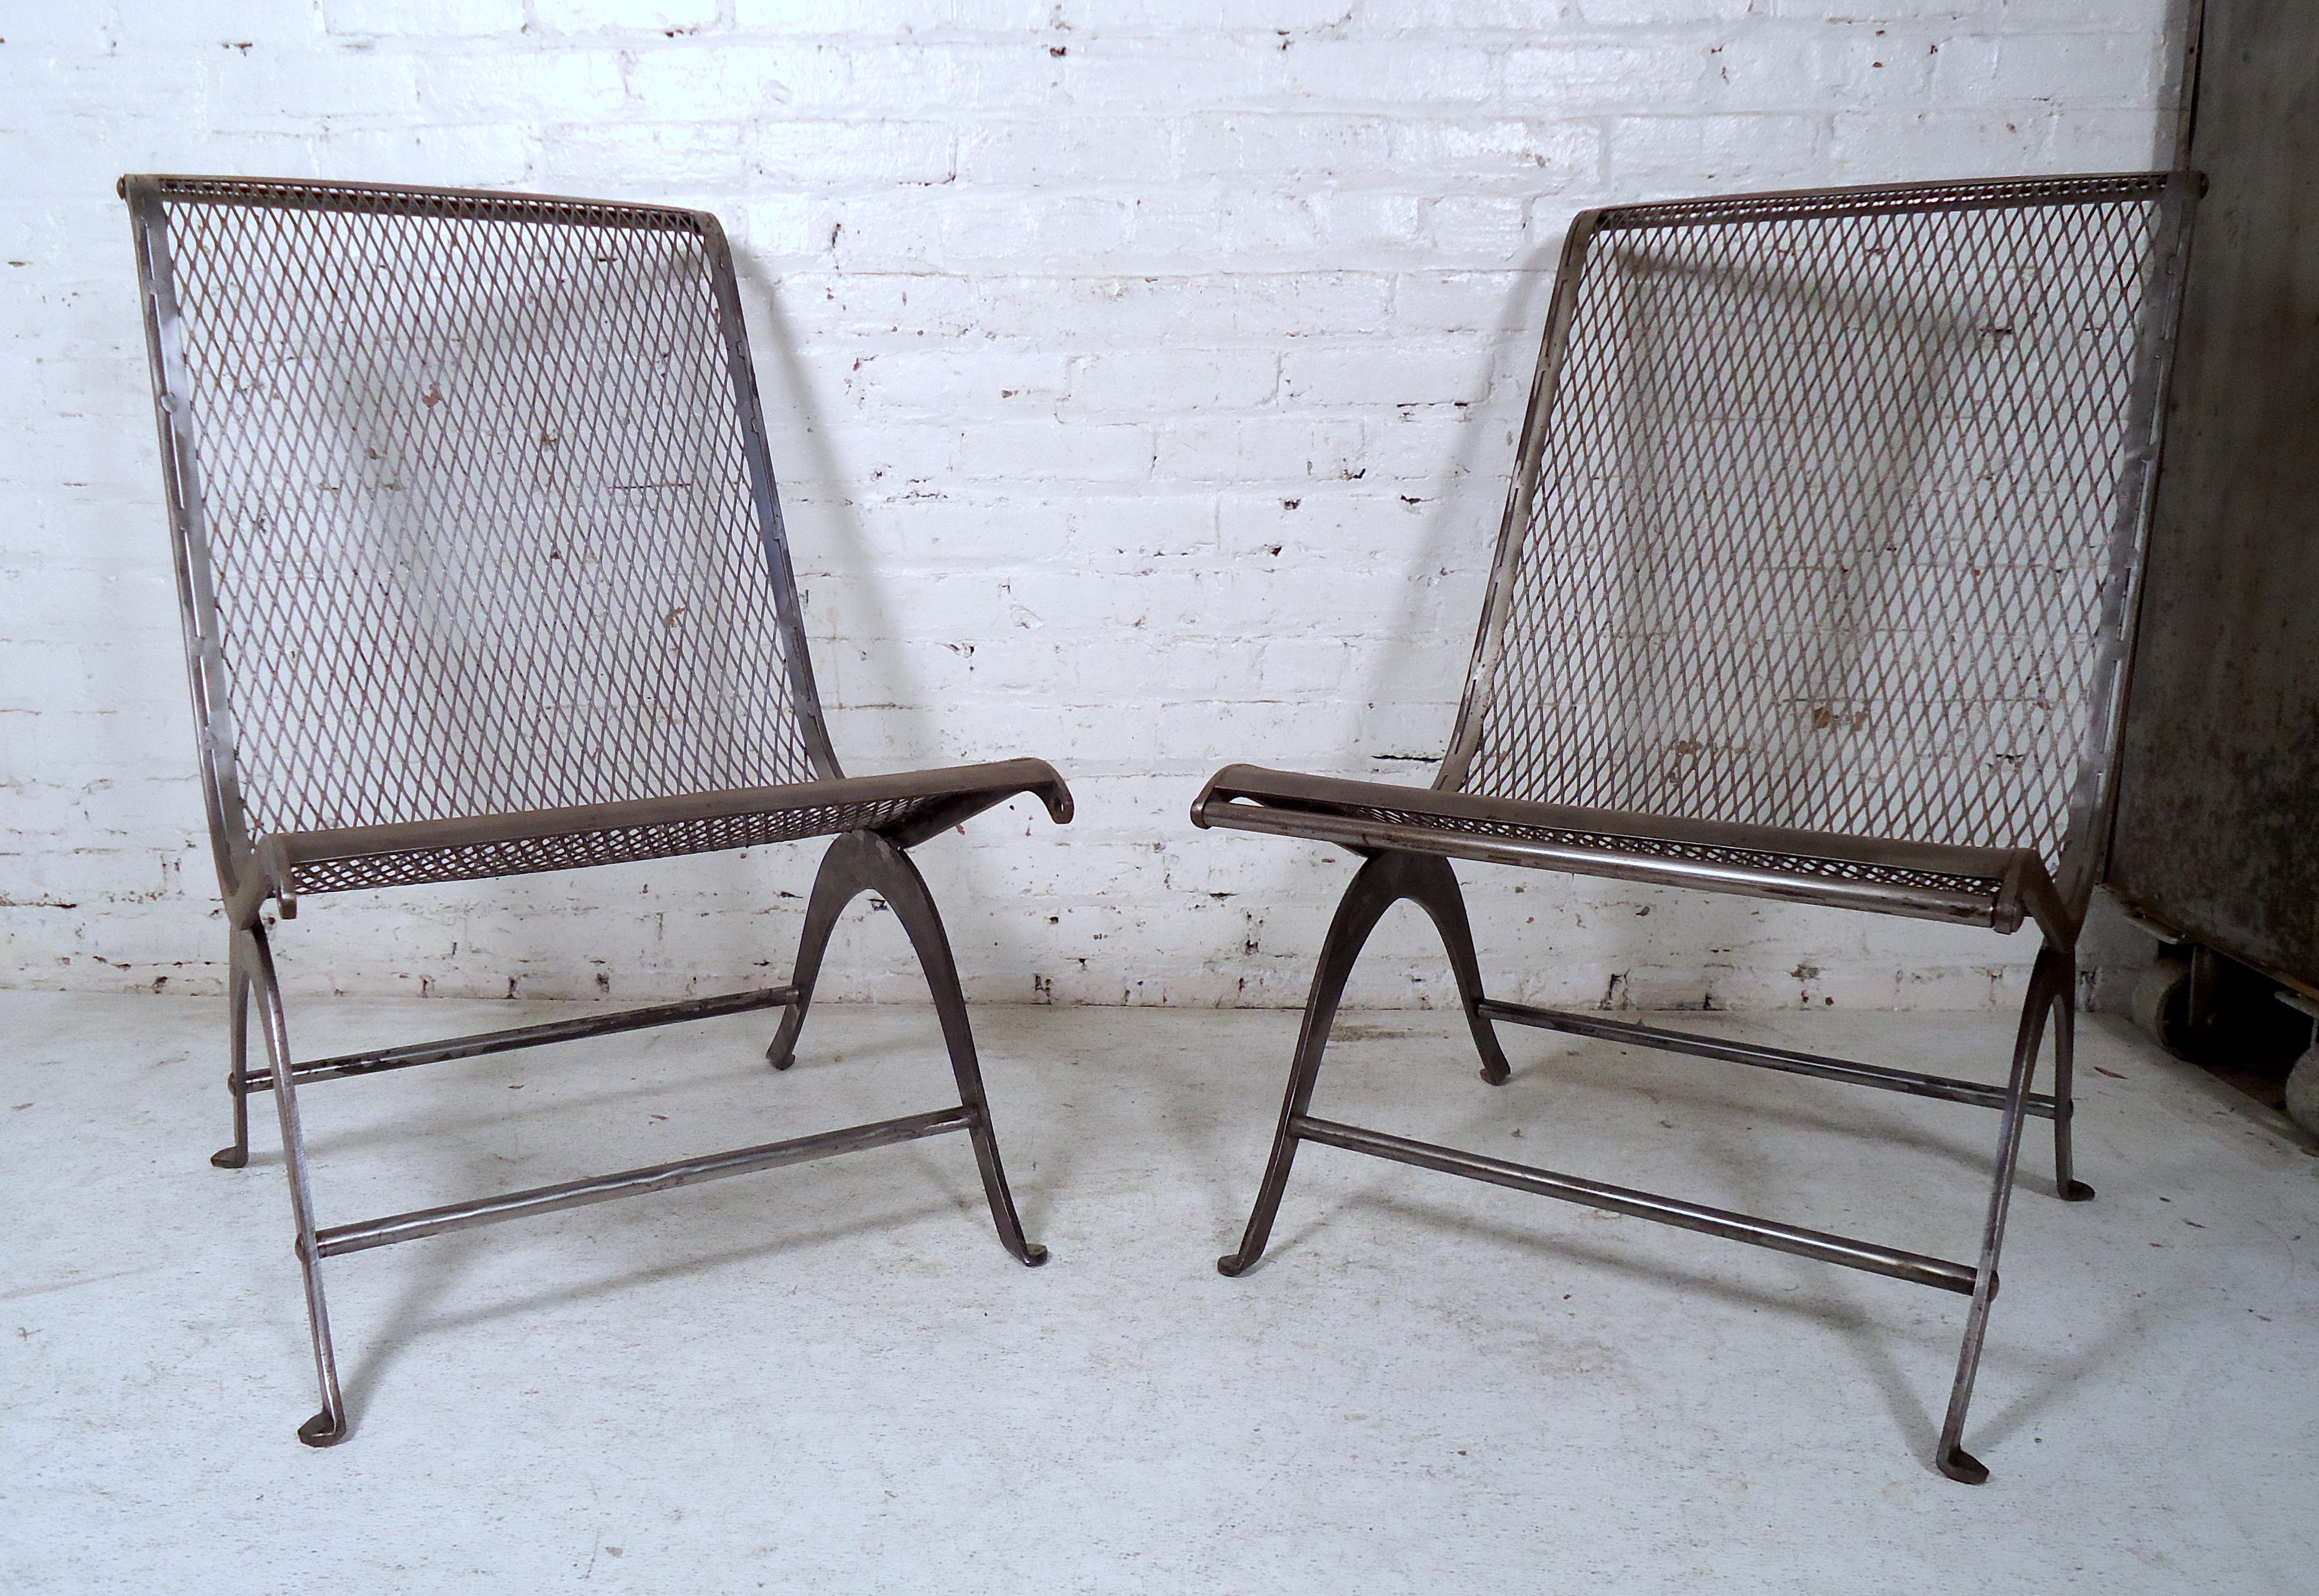 Gorgeous pair of Industrial metal chairs featured in a bare metal finish.

(Please confirm item location - NY or NJ with dealer).